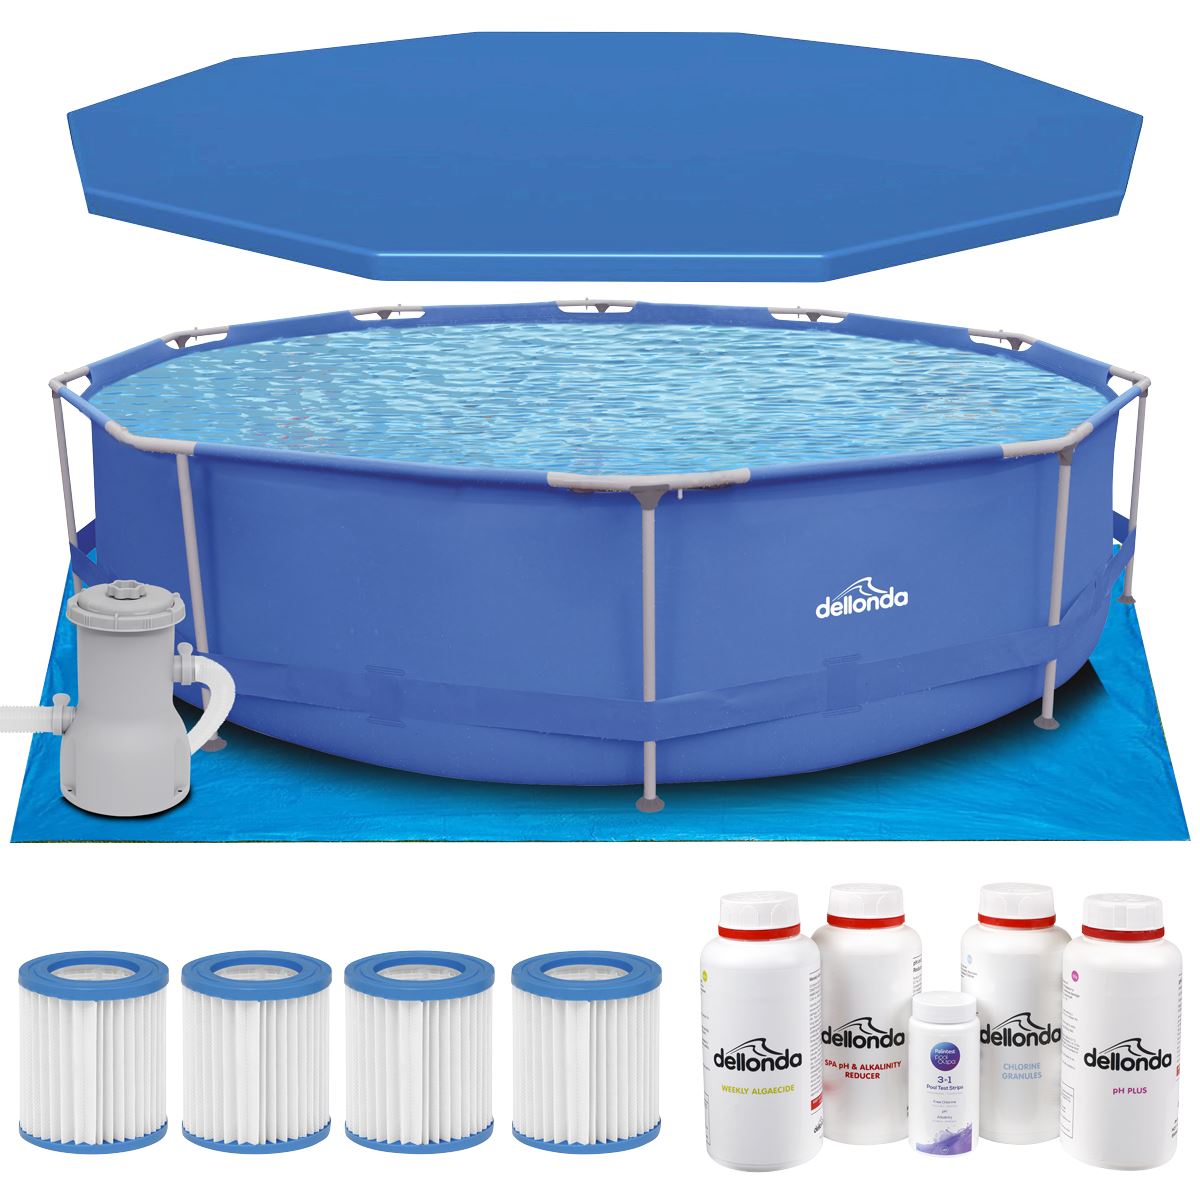 Dellonda 12ft Steel Frame Swimming Pool Round with Accessories, Blue